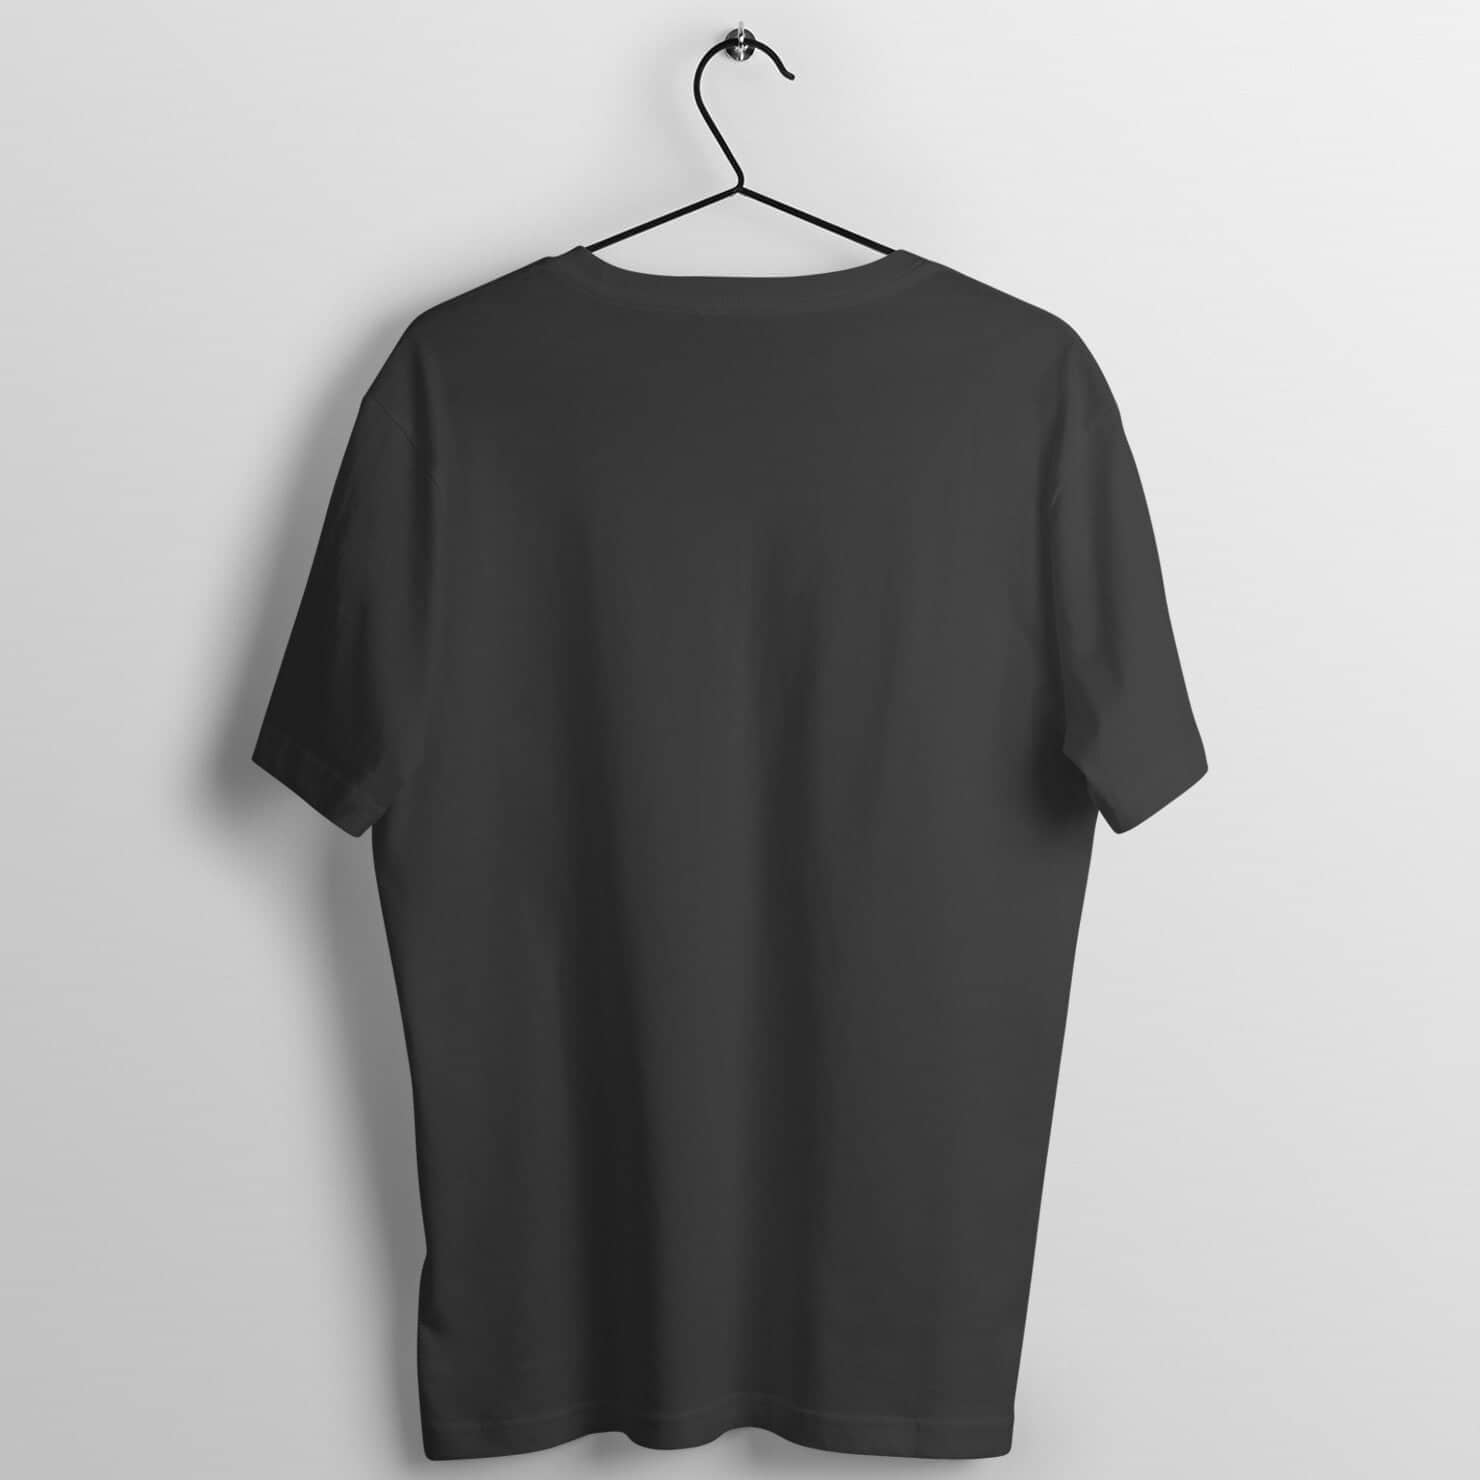 I Like This Color Special Black T Shirt for Men and Women Shirts & Tops Printrove 